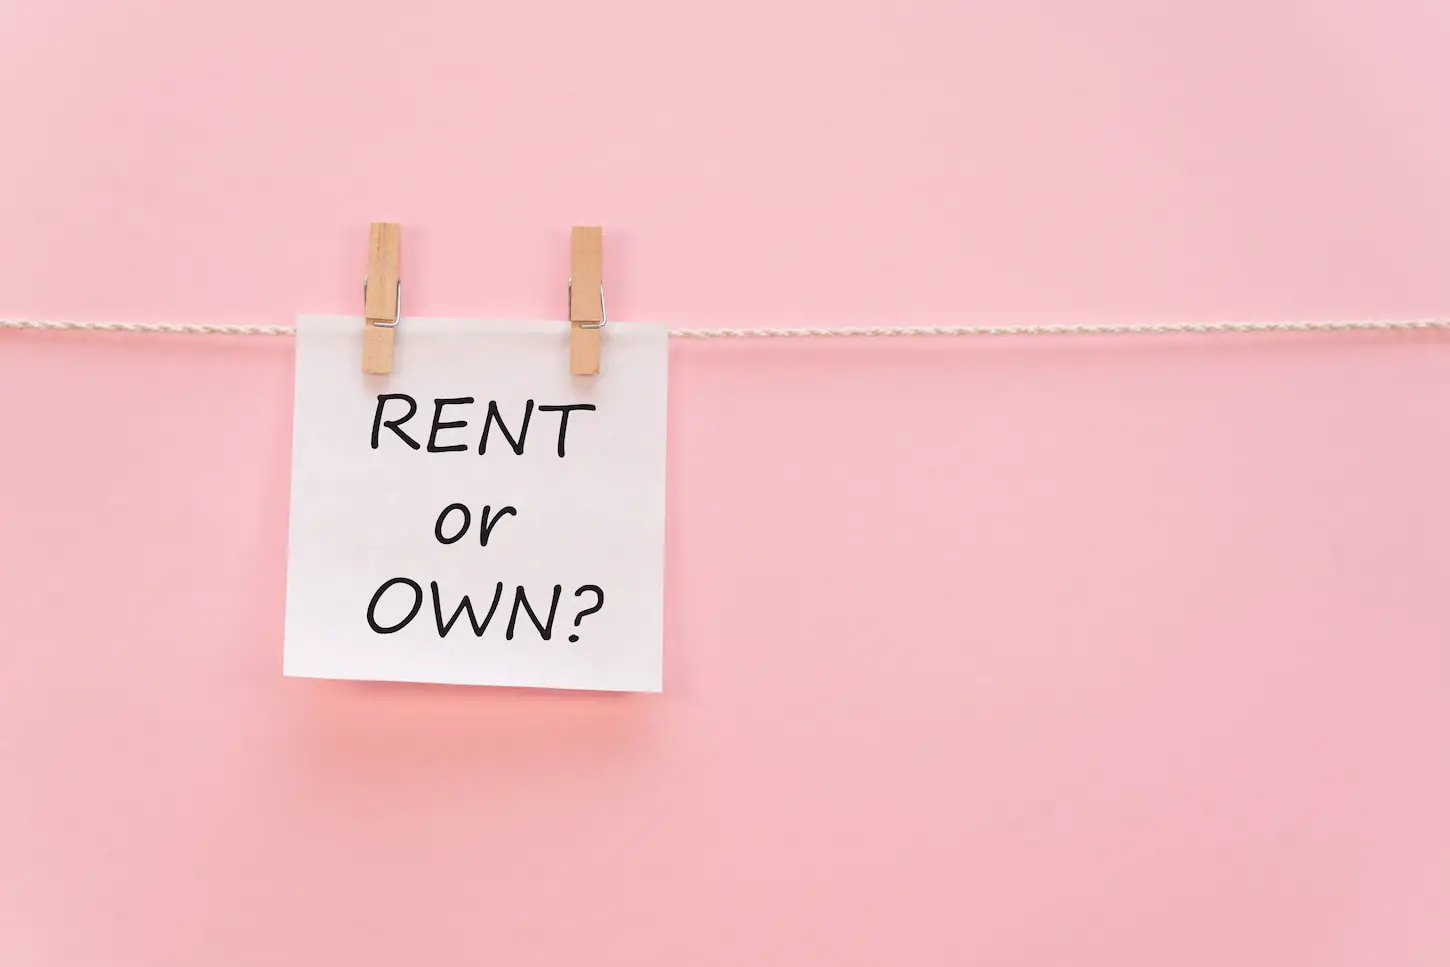 An image of a sticker with the inscription RENT or OWN hangs with a clothespin on a rope on a pink background.